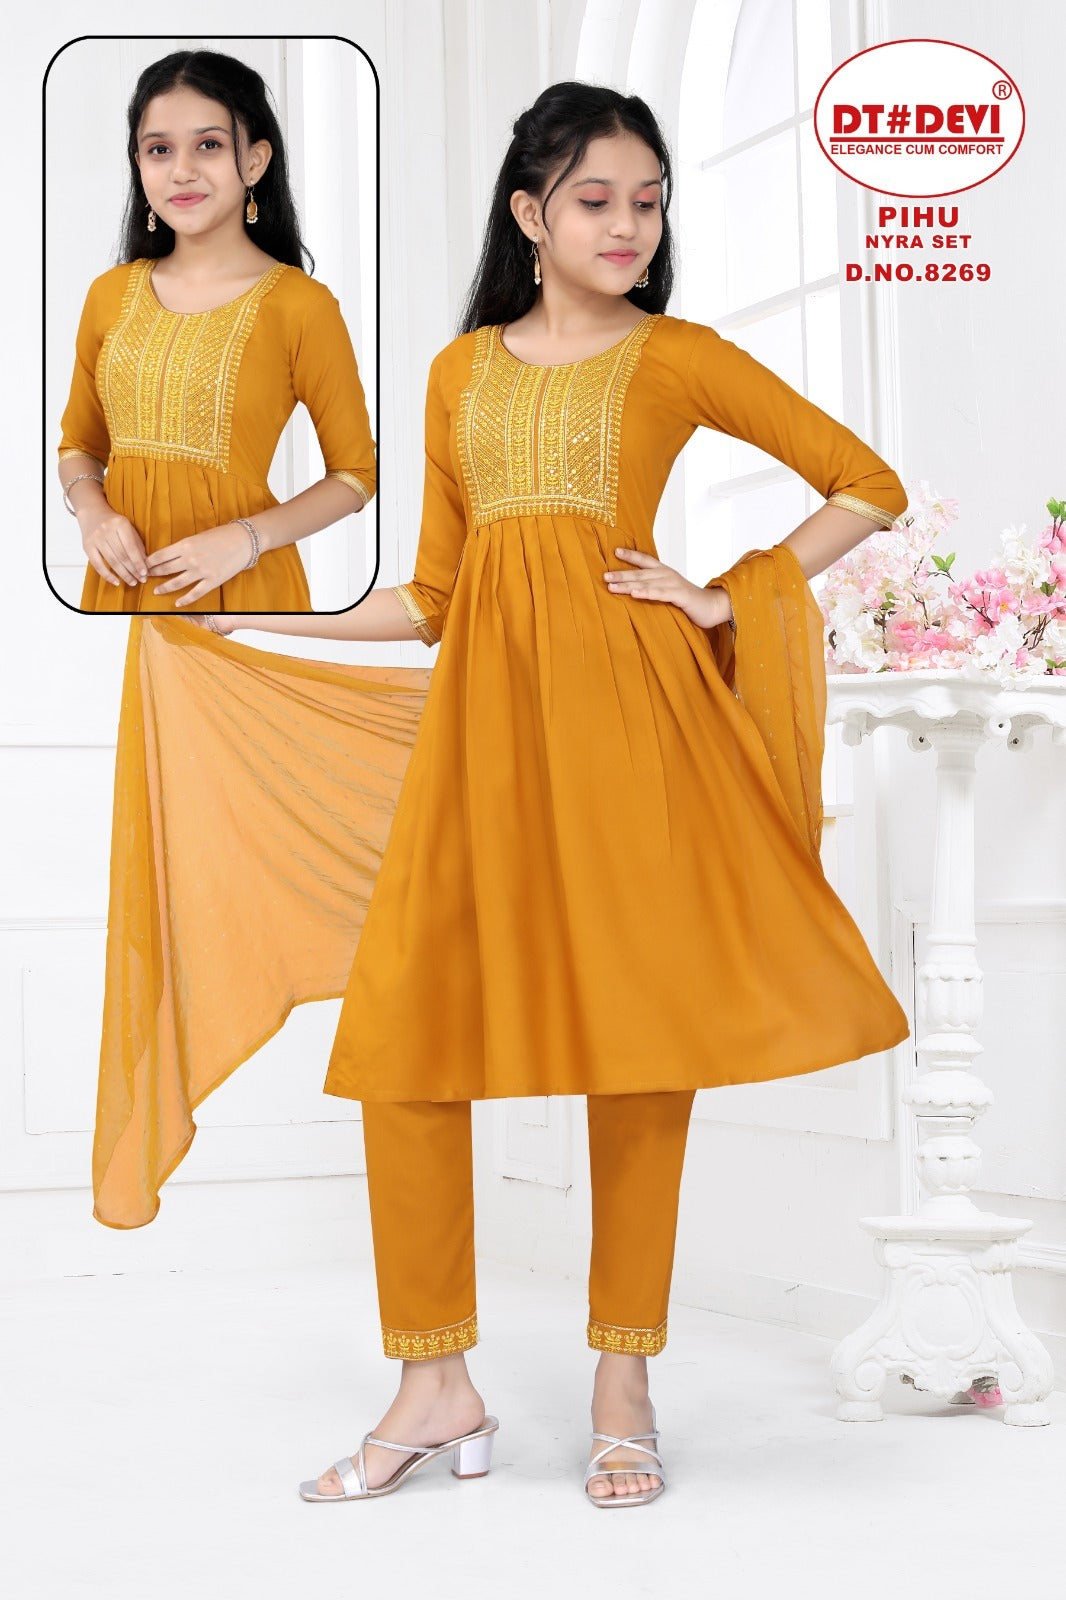 Pihu-8269 Dt Devi Rayon Girls Readymade Suits